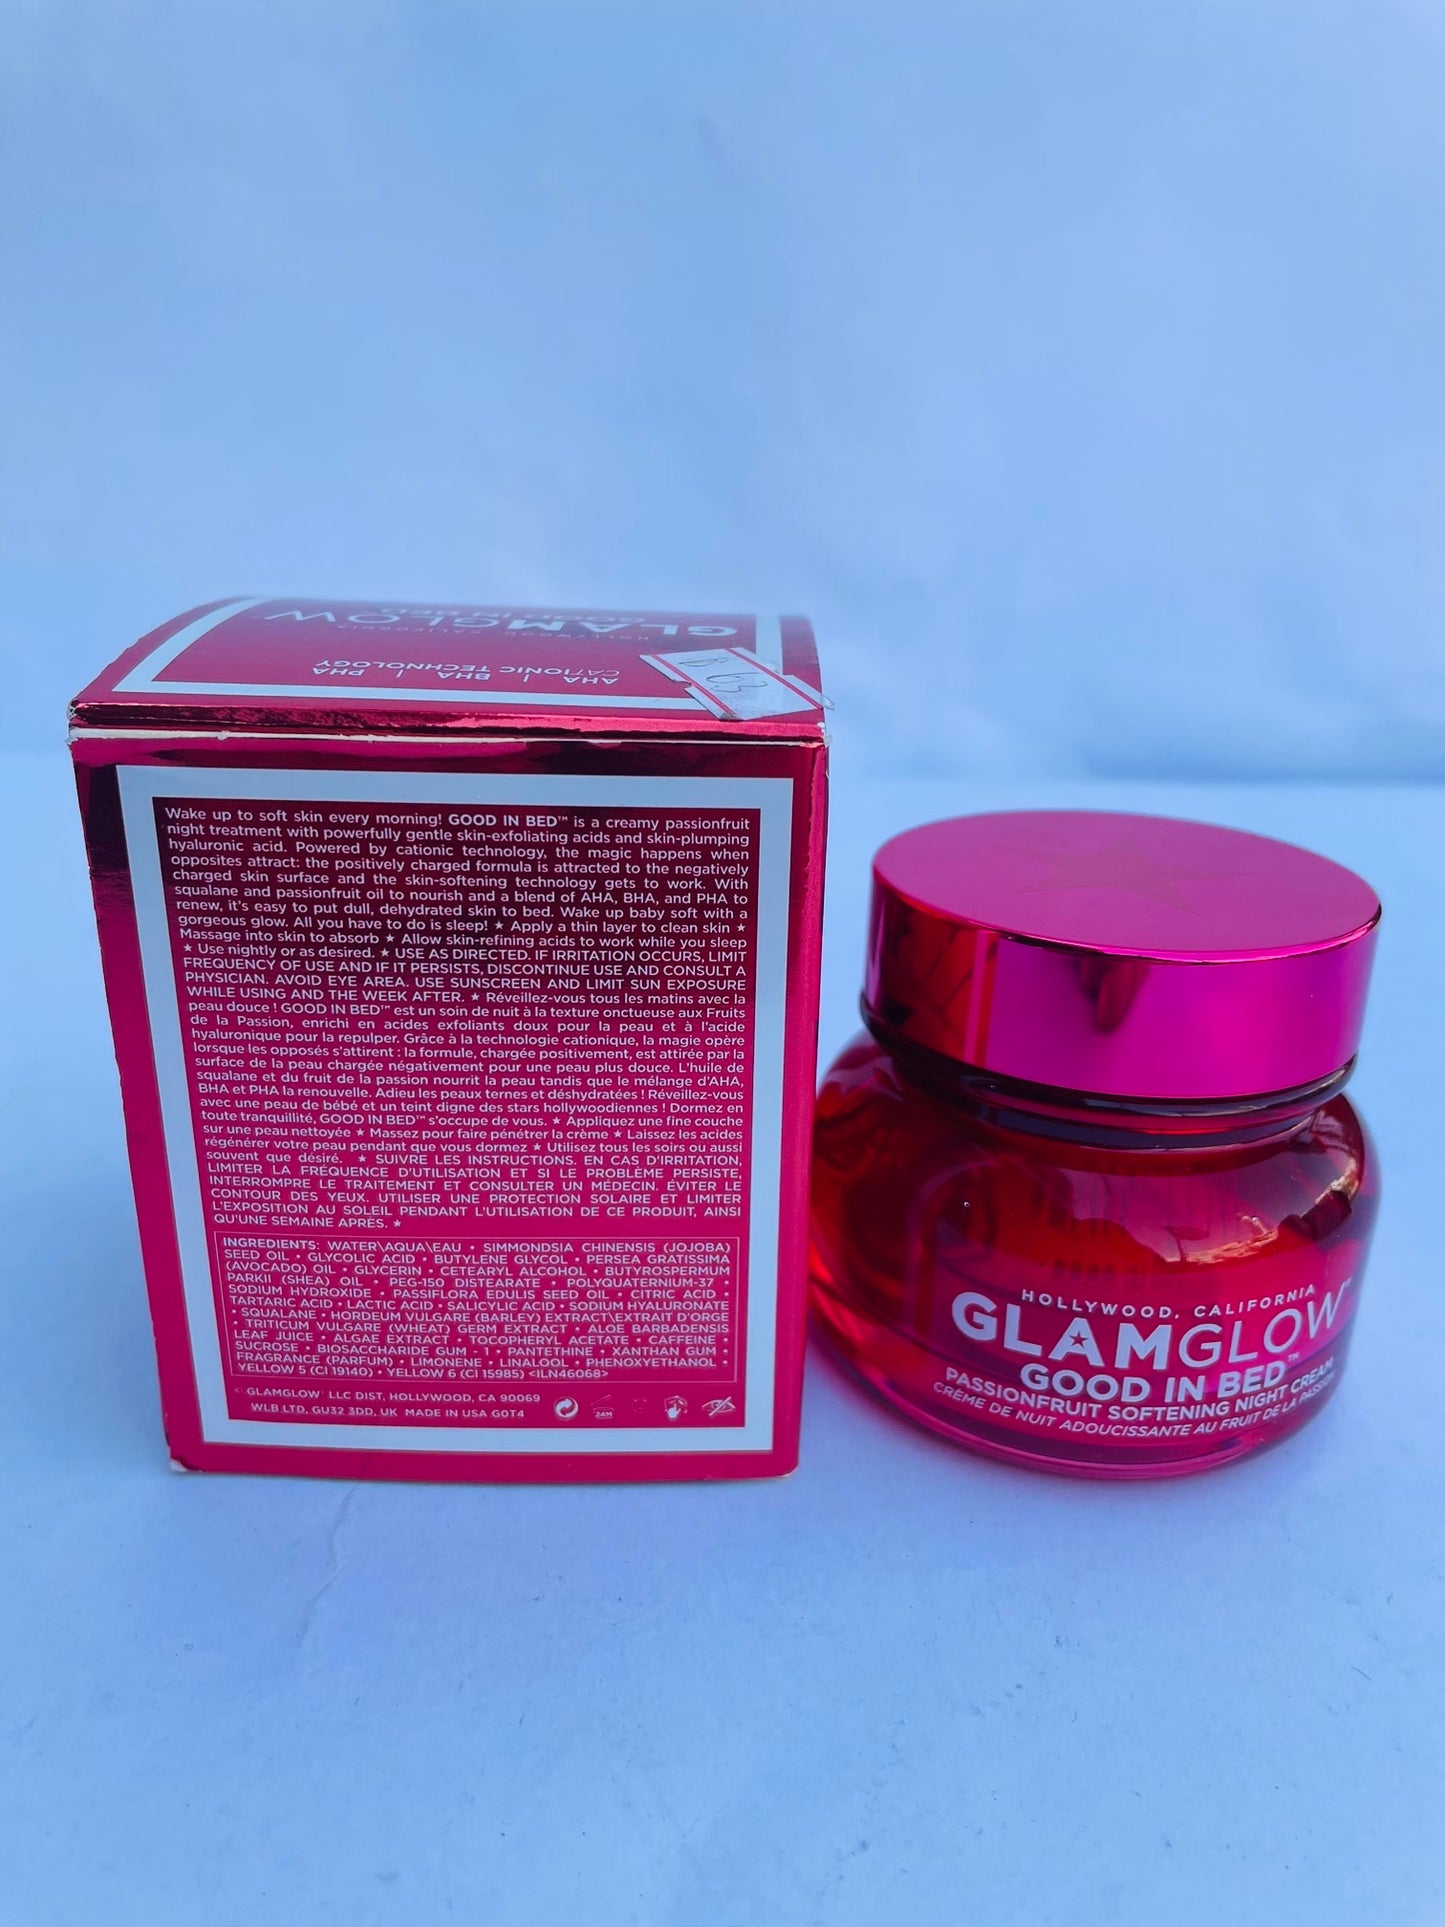 Glam glow good in bed night cream